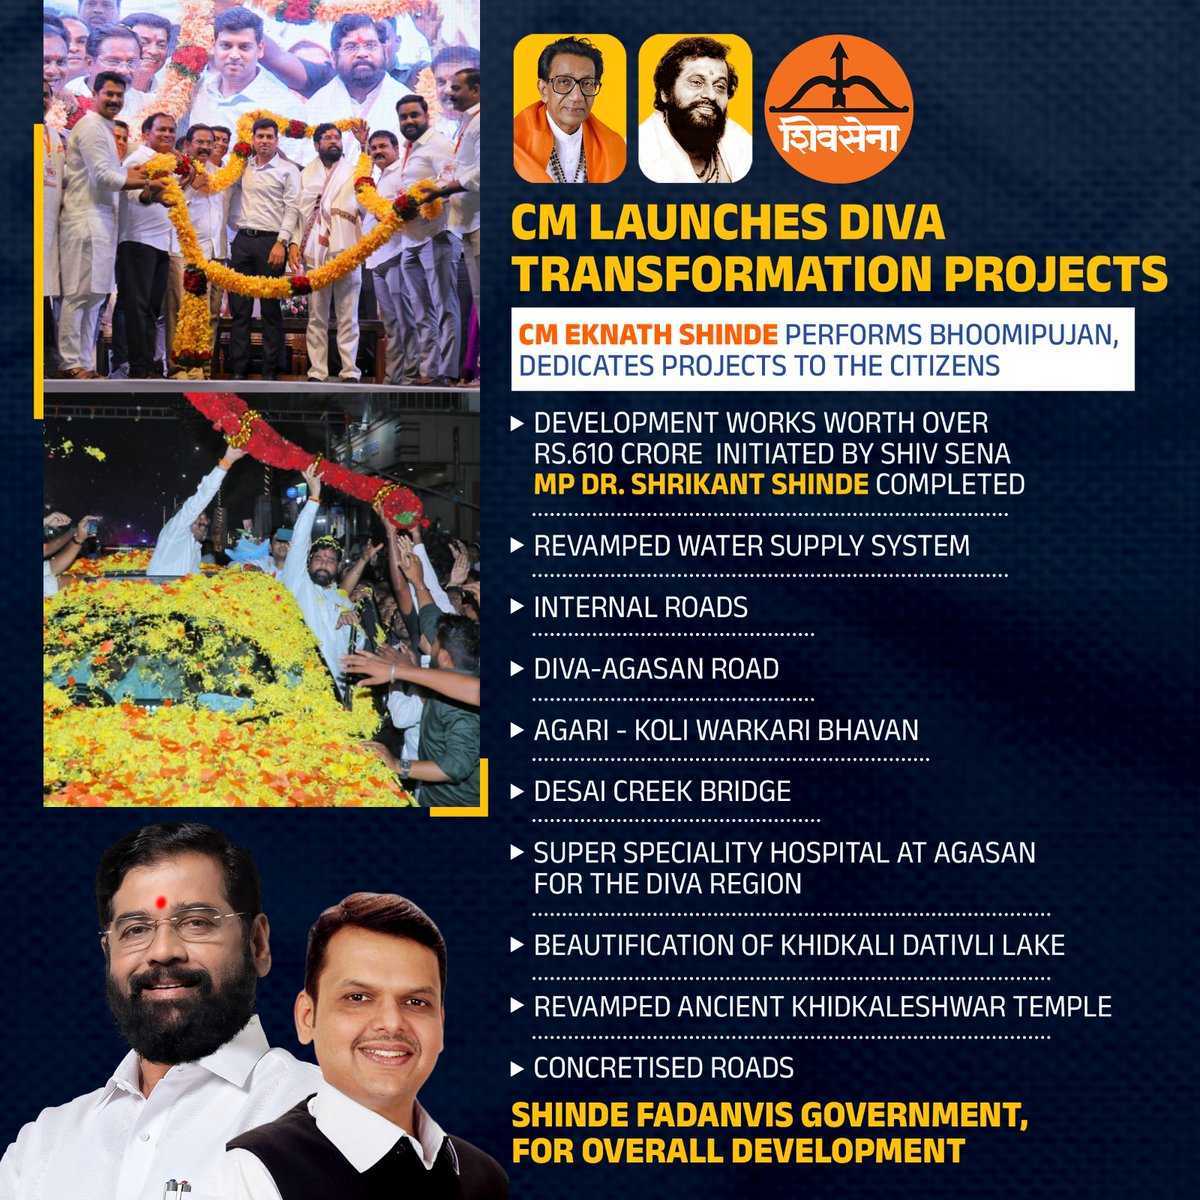 Much Needed Devlopment in Diva, Thanks to Eknath Shinde ji for this Transformation Projects.